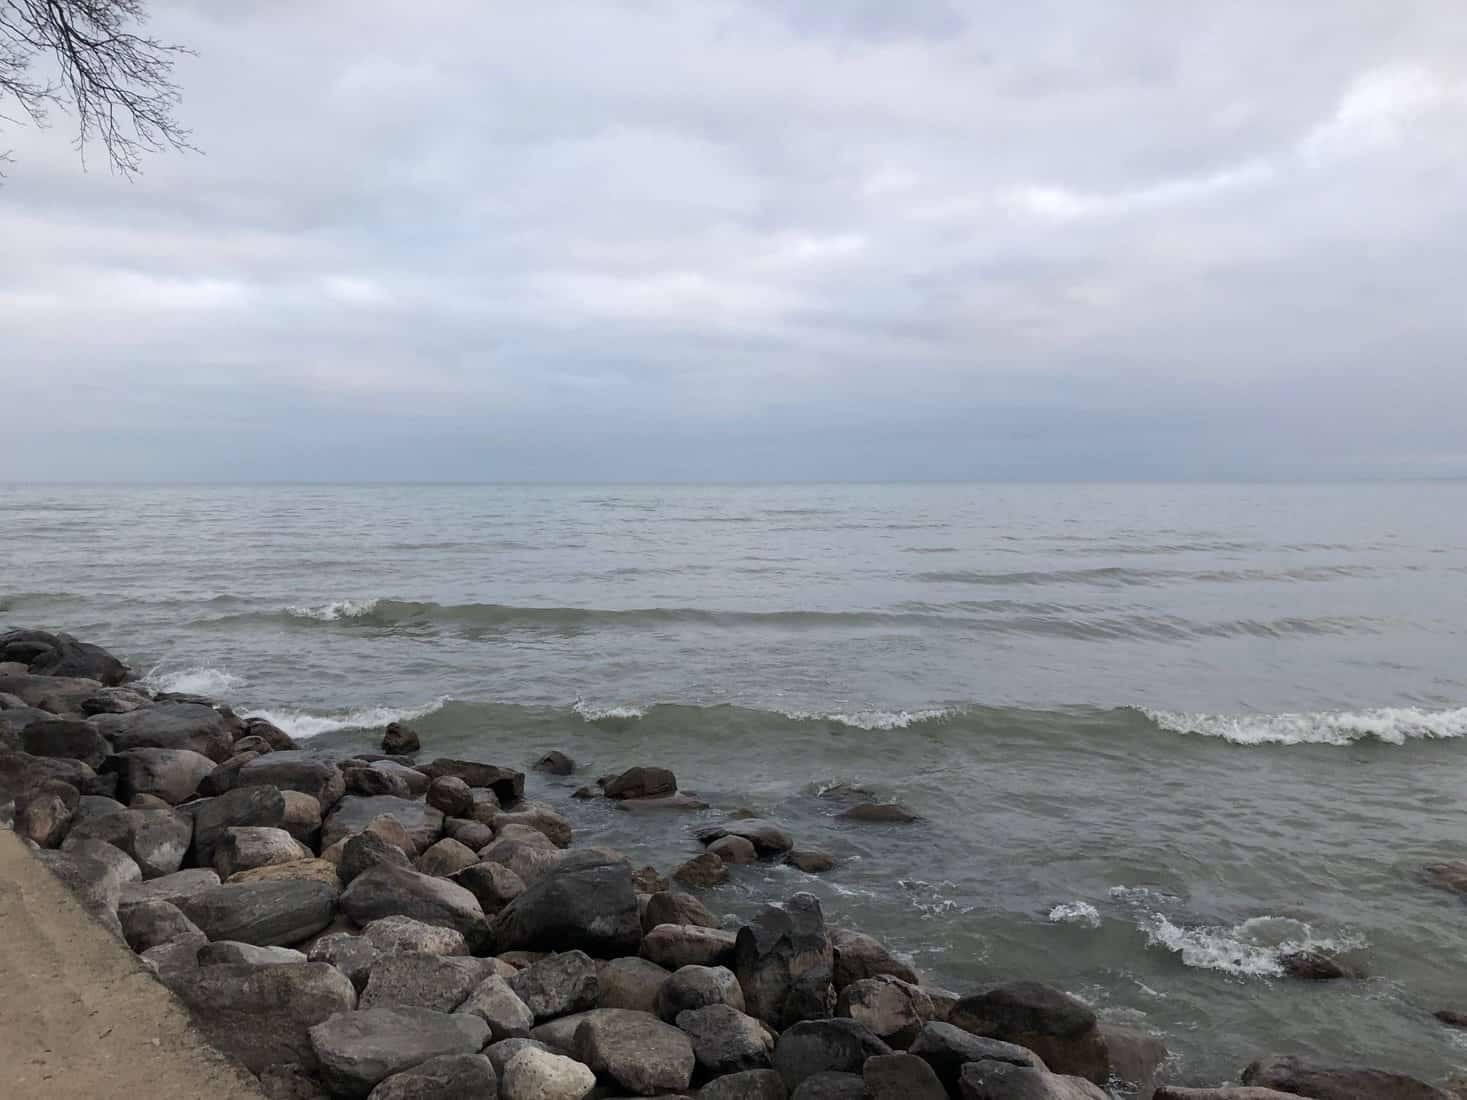 Waves of energy moving water across stones and into and along a breakwall, on a grey winter day at Oakville, Ontario.